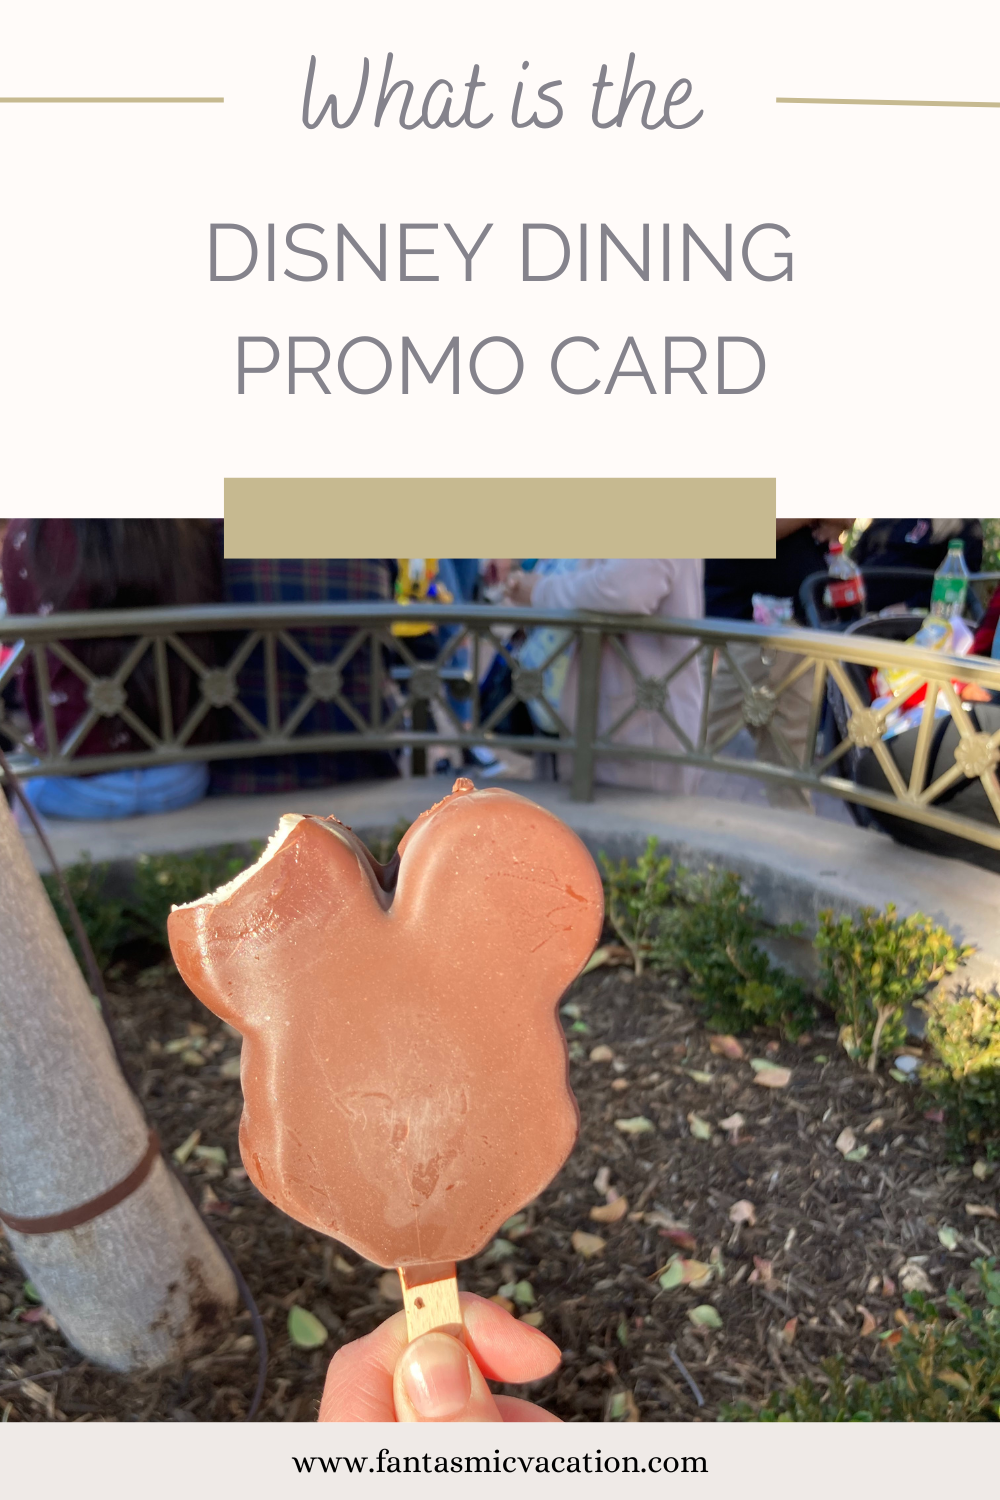 What is the Disney Dining Promo Card Fantasmic Vacation